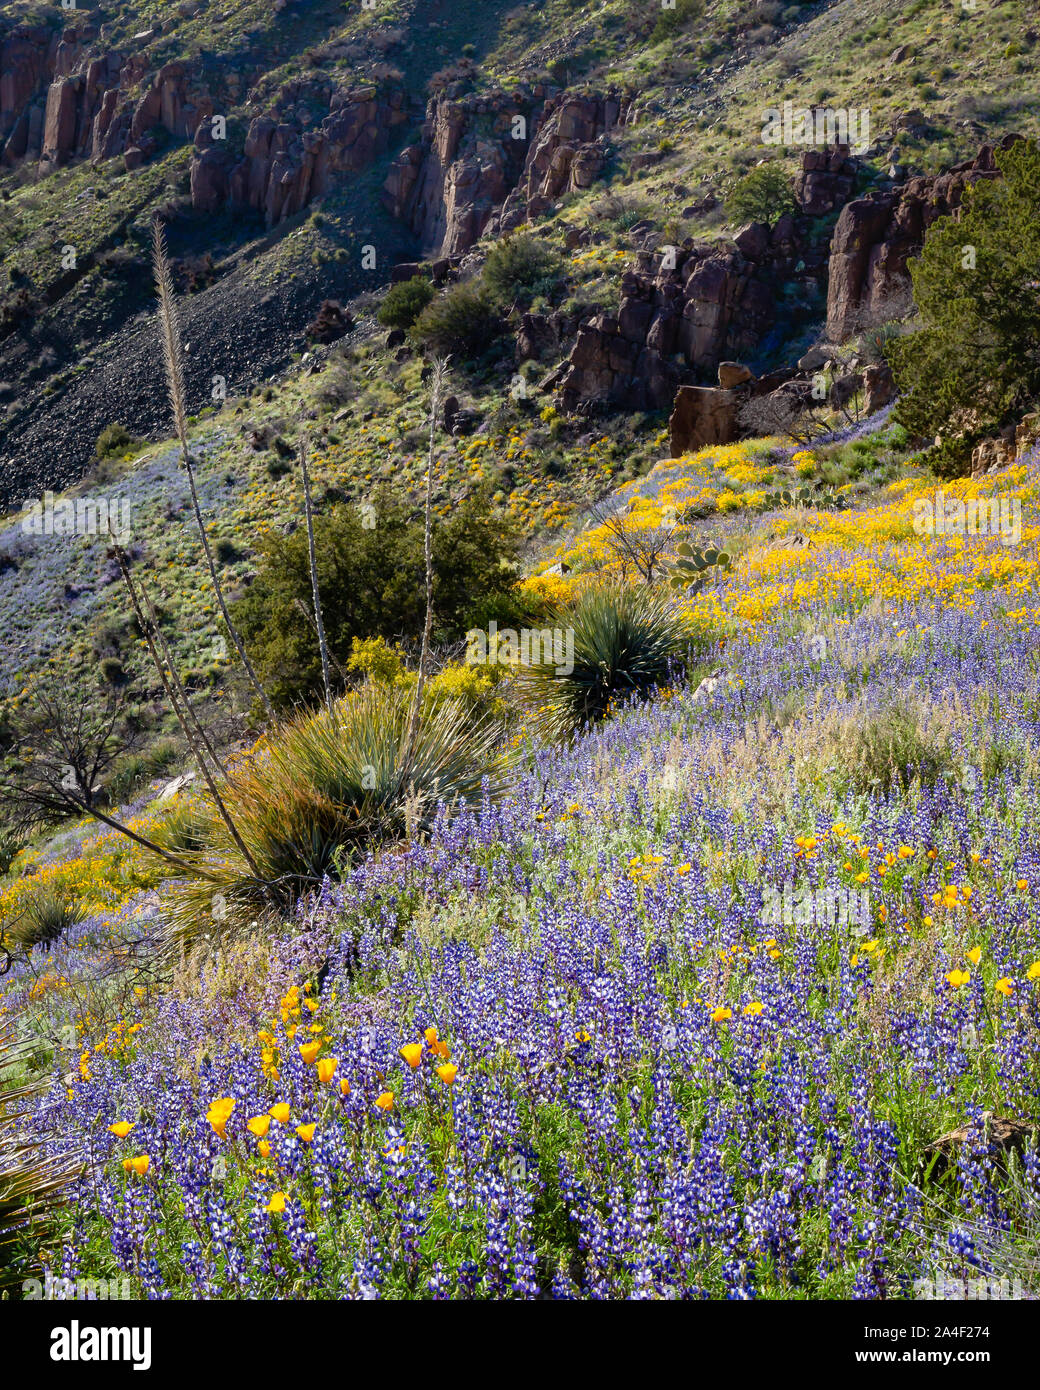 Colorfull wildflowers adorn the slopes of the inner Salt River Canyon. East central Arizona. Stock Photo